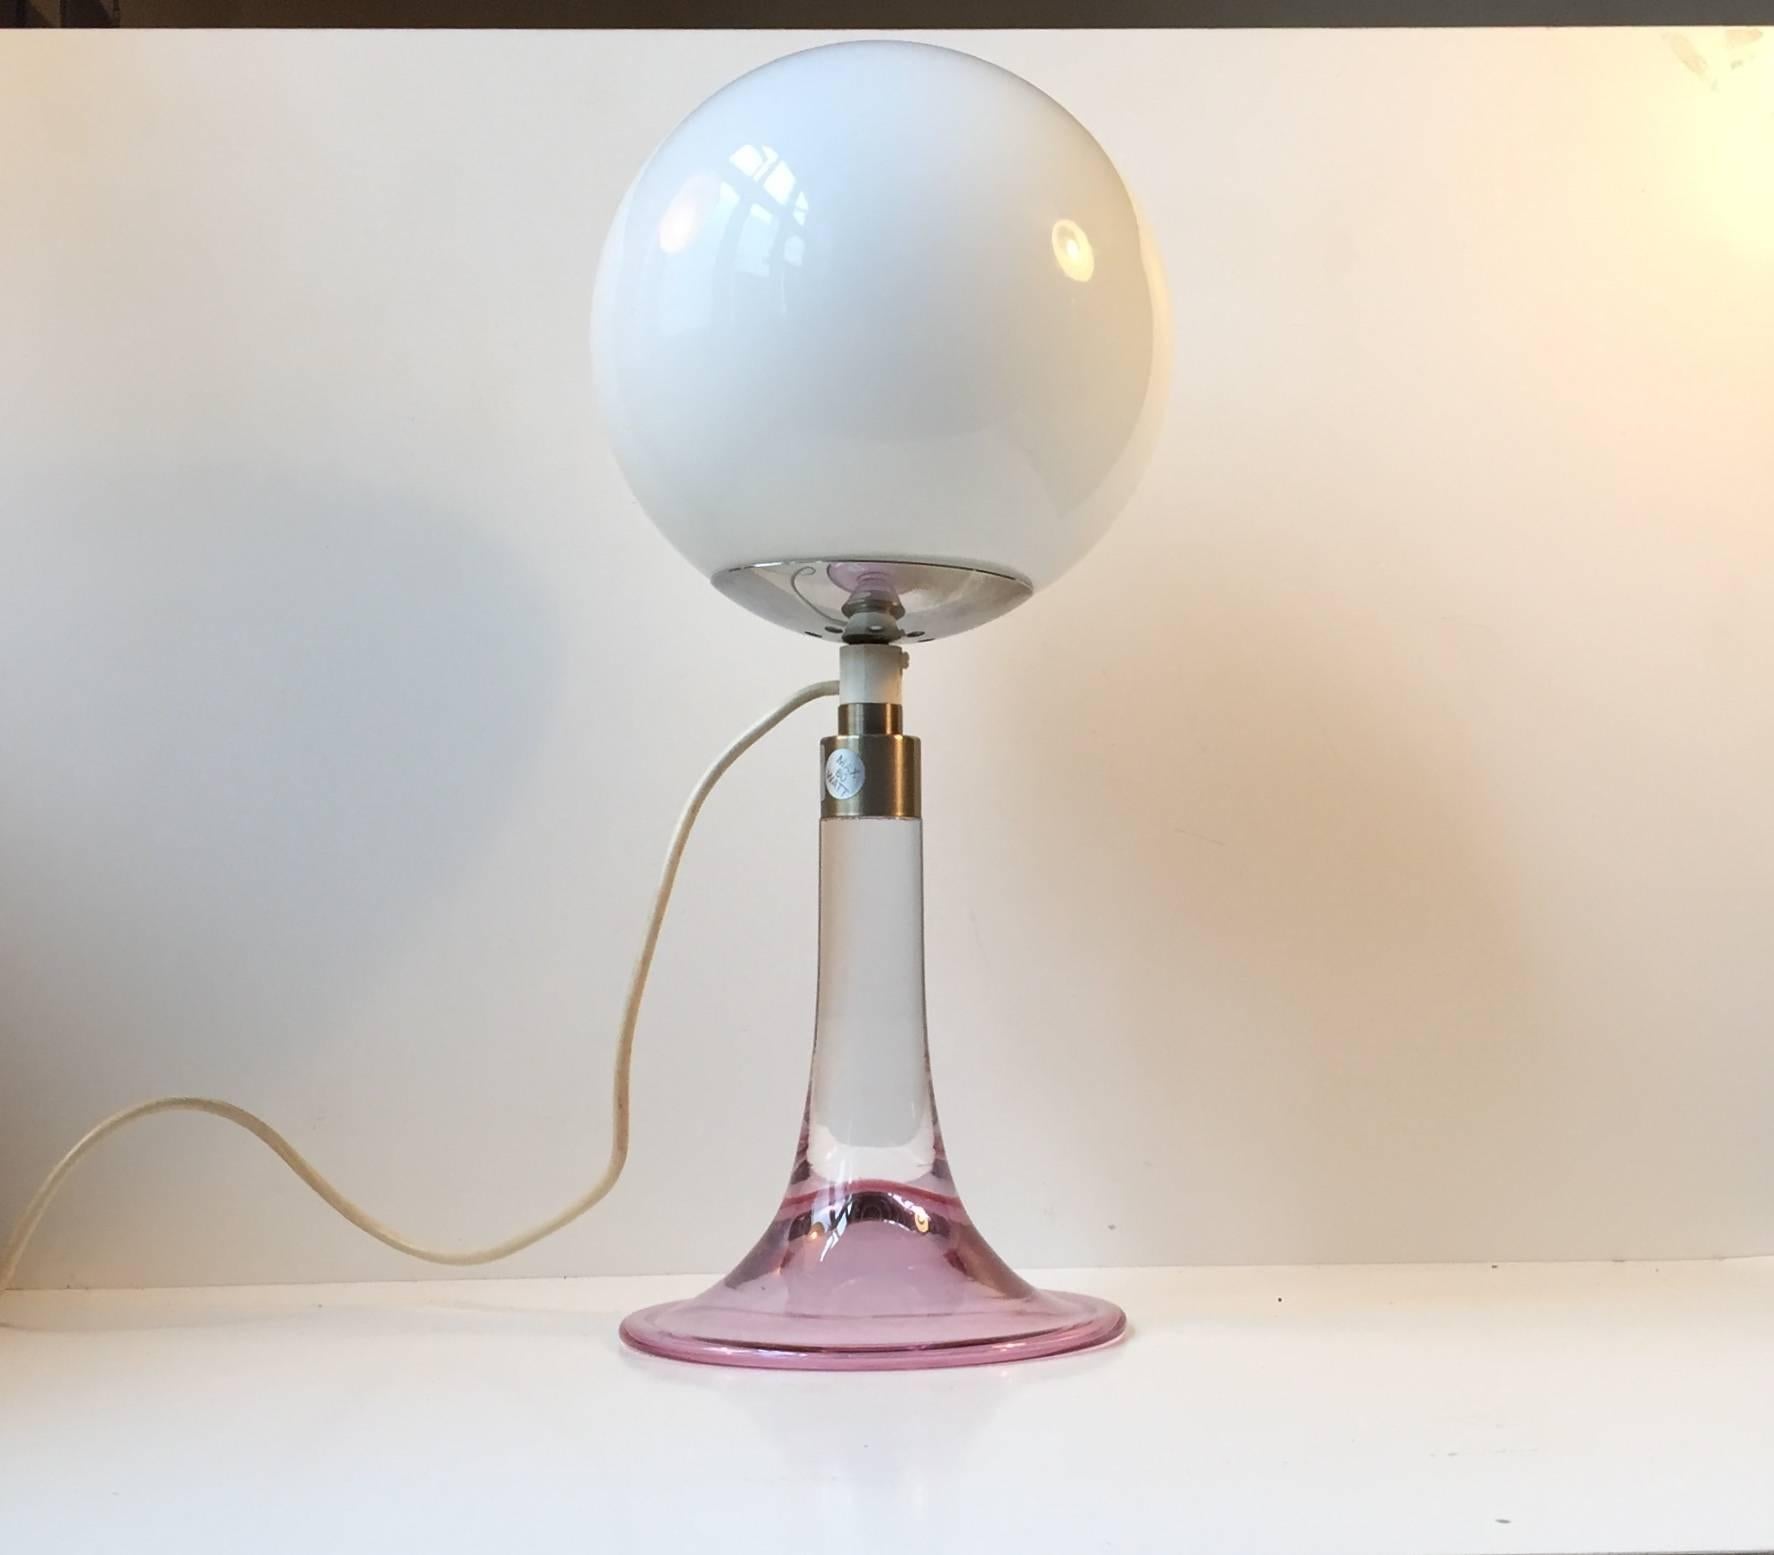 Trumpet-shaped table light in pink glass - called fanfare. Manufactured and designed by Royal Copenhagen in collaboration with Holmegaard in Denmark. It is mounted with an opaline glass shade. Sticker from RC is still present to the base.